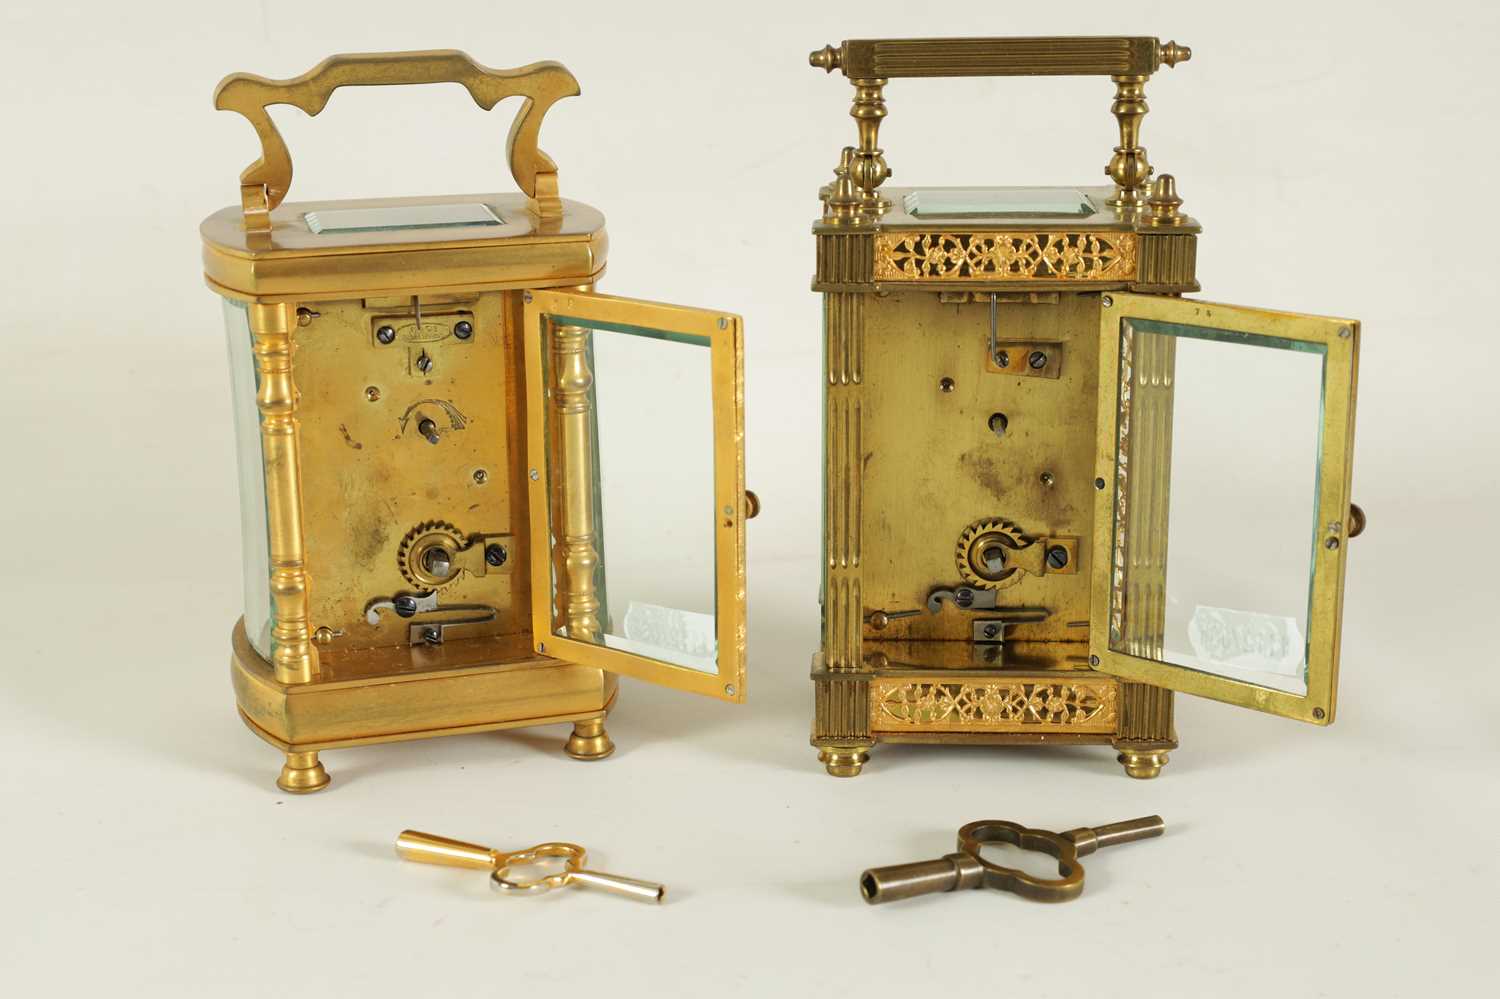 TWO LATE 19TH CENTURY FRENCH CARRIAGE CLOCKS - Image 13 of 14